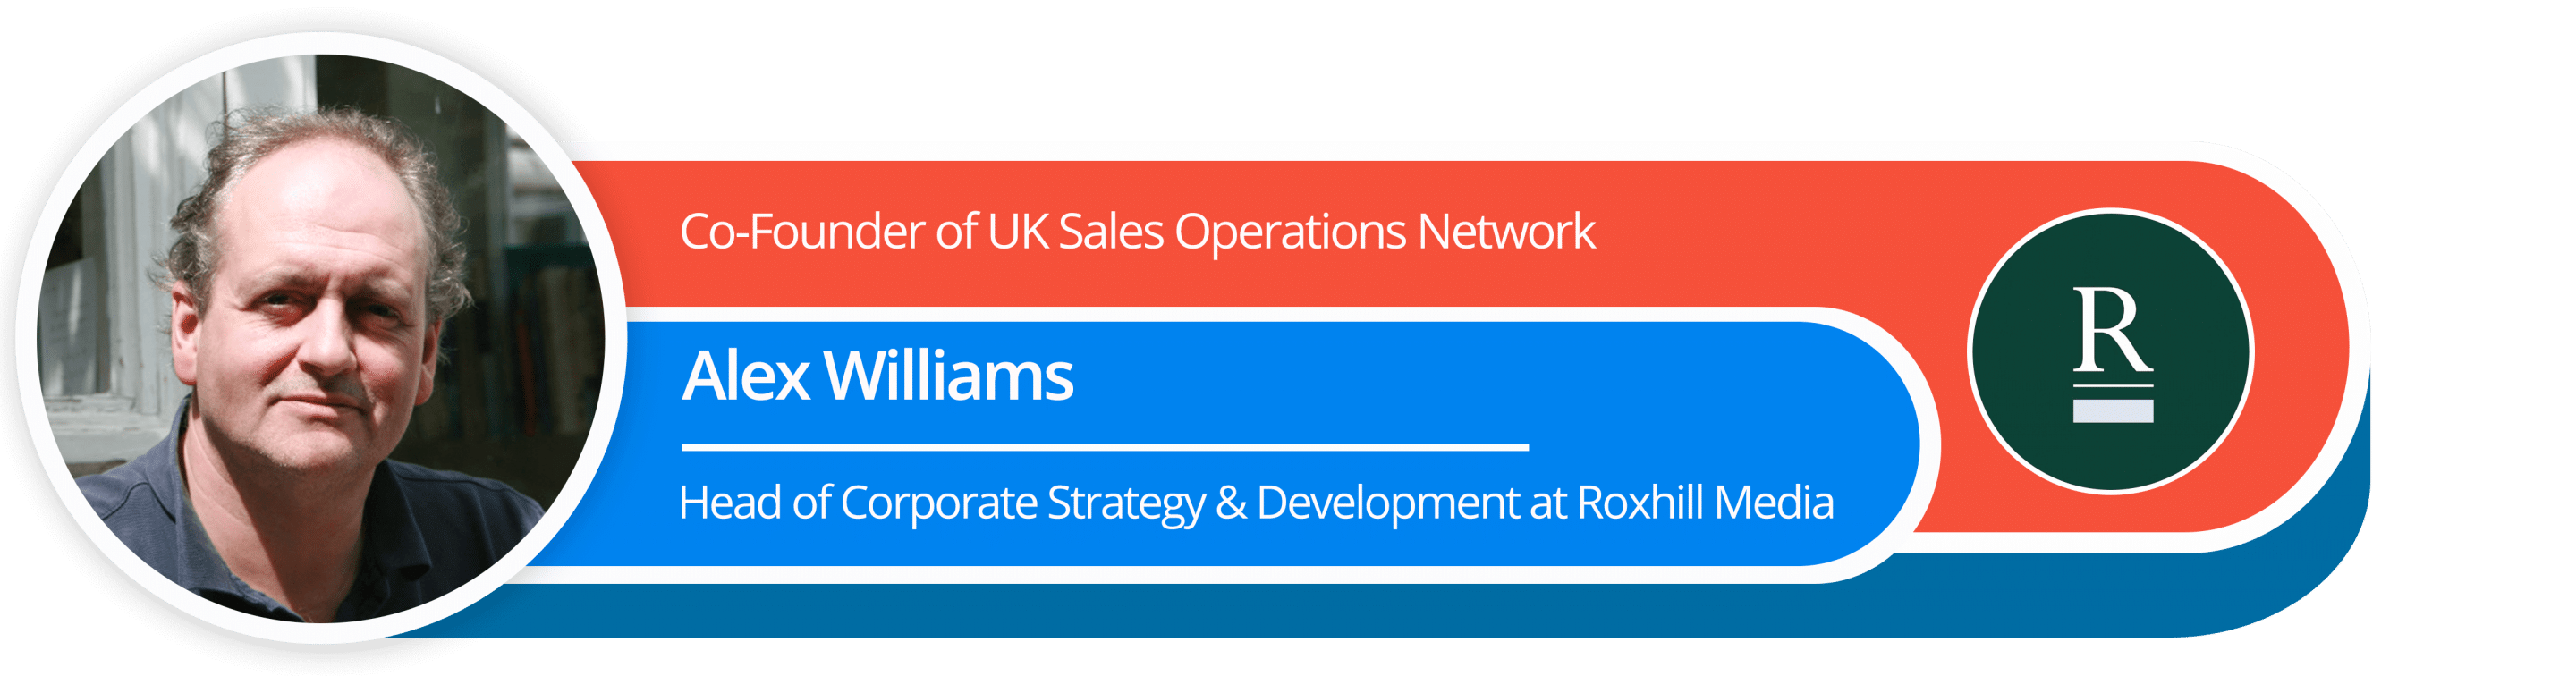 Co-Founder of UK Sales Operations Network
Alex Williams
Head of Corporate Strategy & Development at Roxhill Media